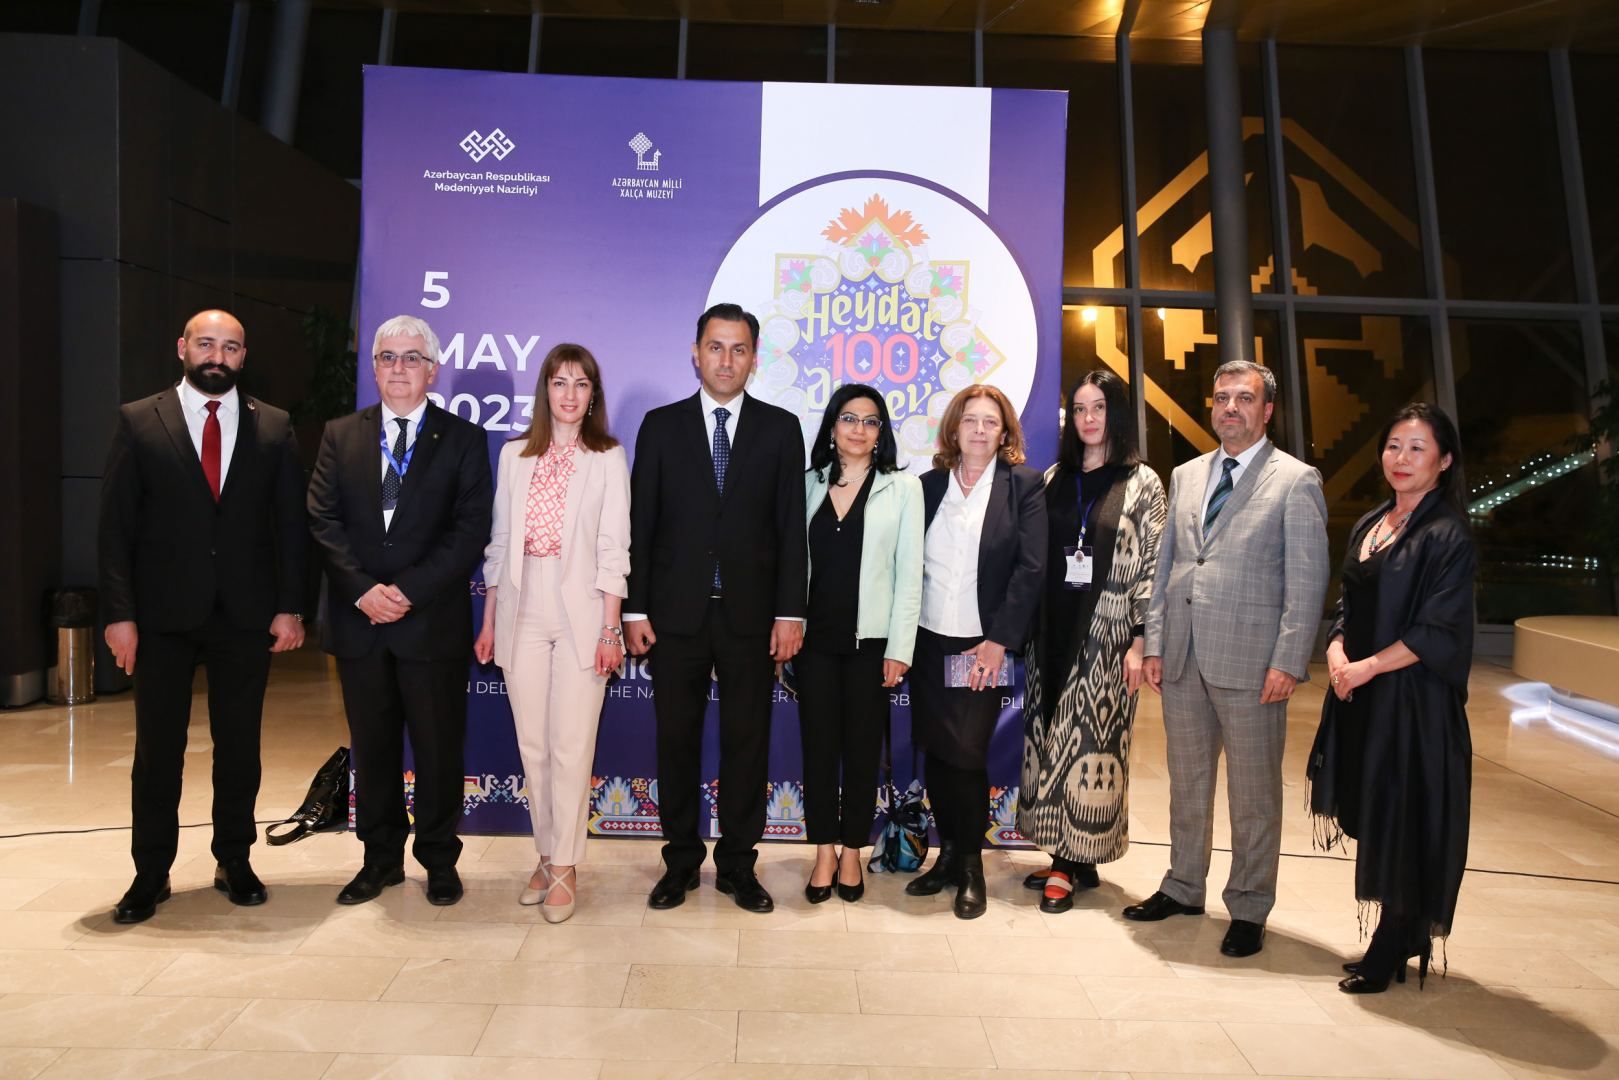 Carpet Museum hosts series of events within Year of Heydar Aliyev  [PHOTOS]